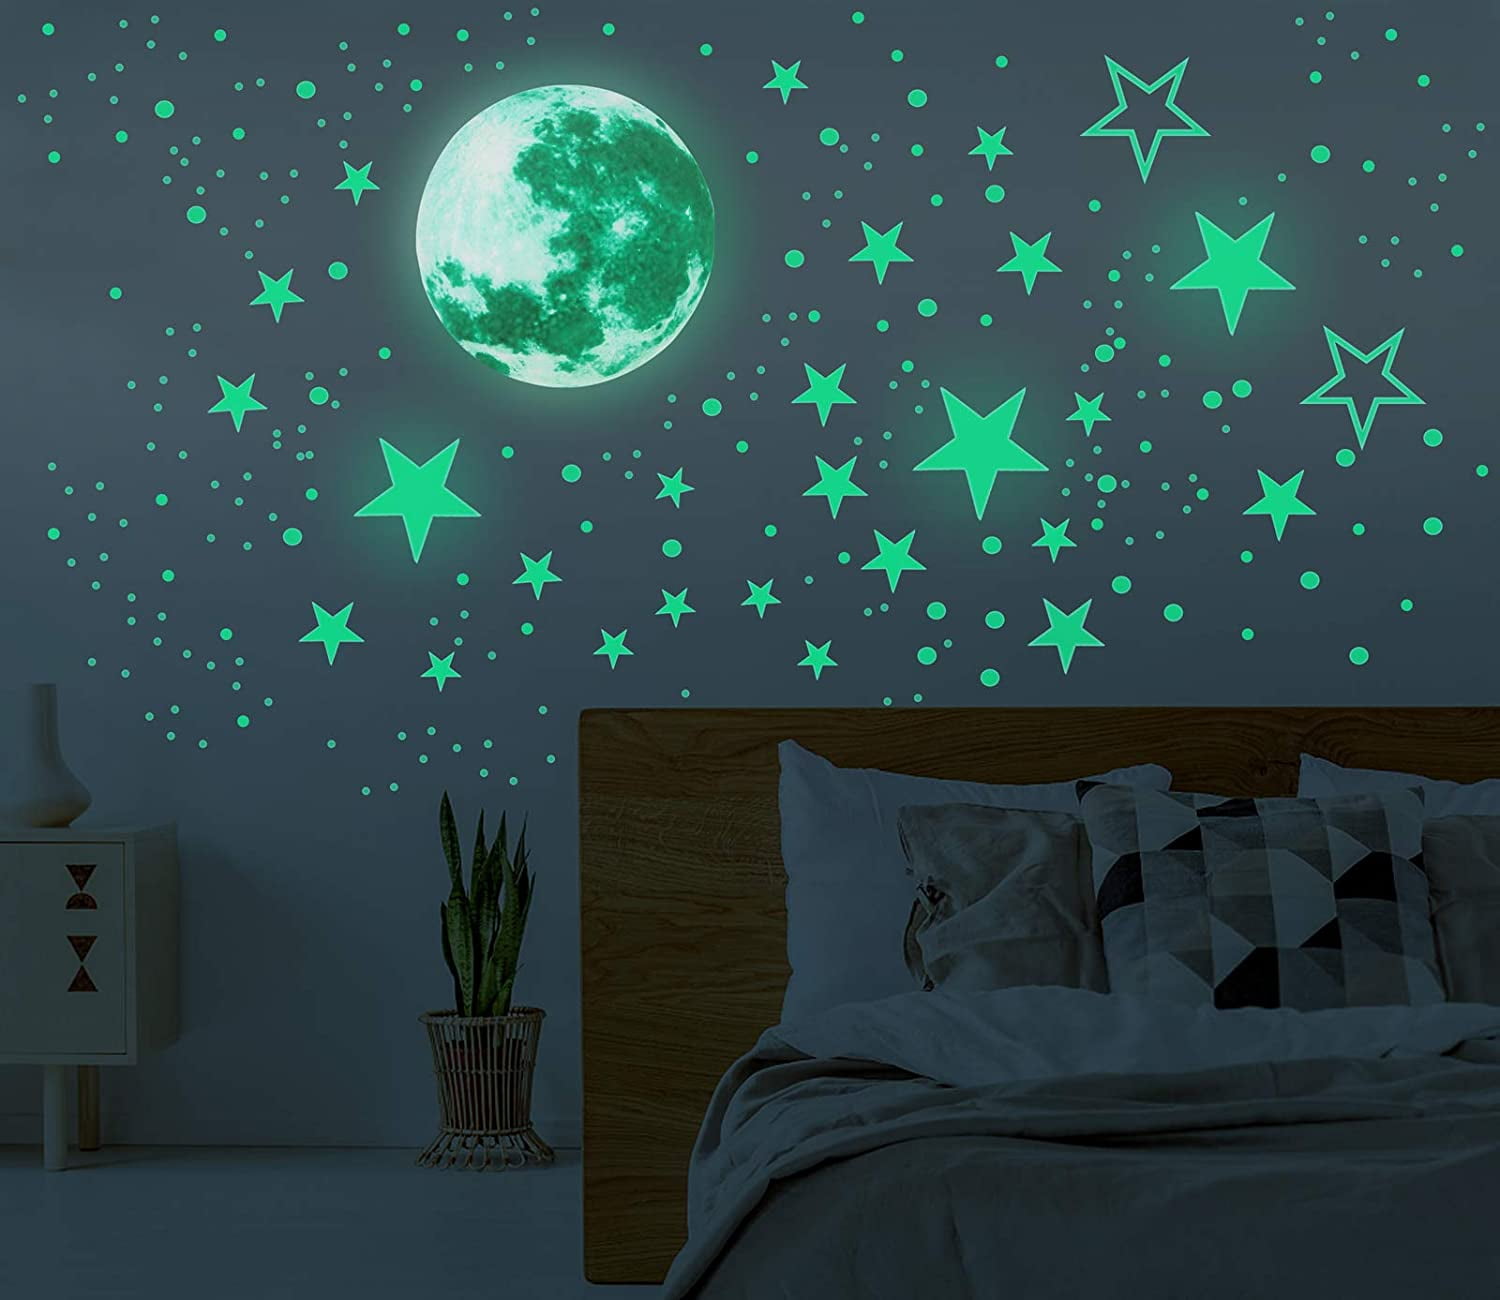 Details about   Luminous Stars Planet Space Wall Stickers Kids Glow In The Dark Room Decor Decal 